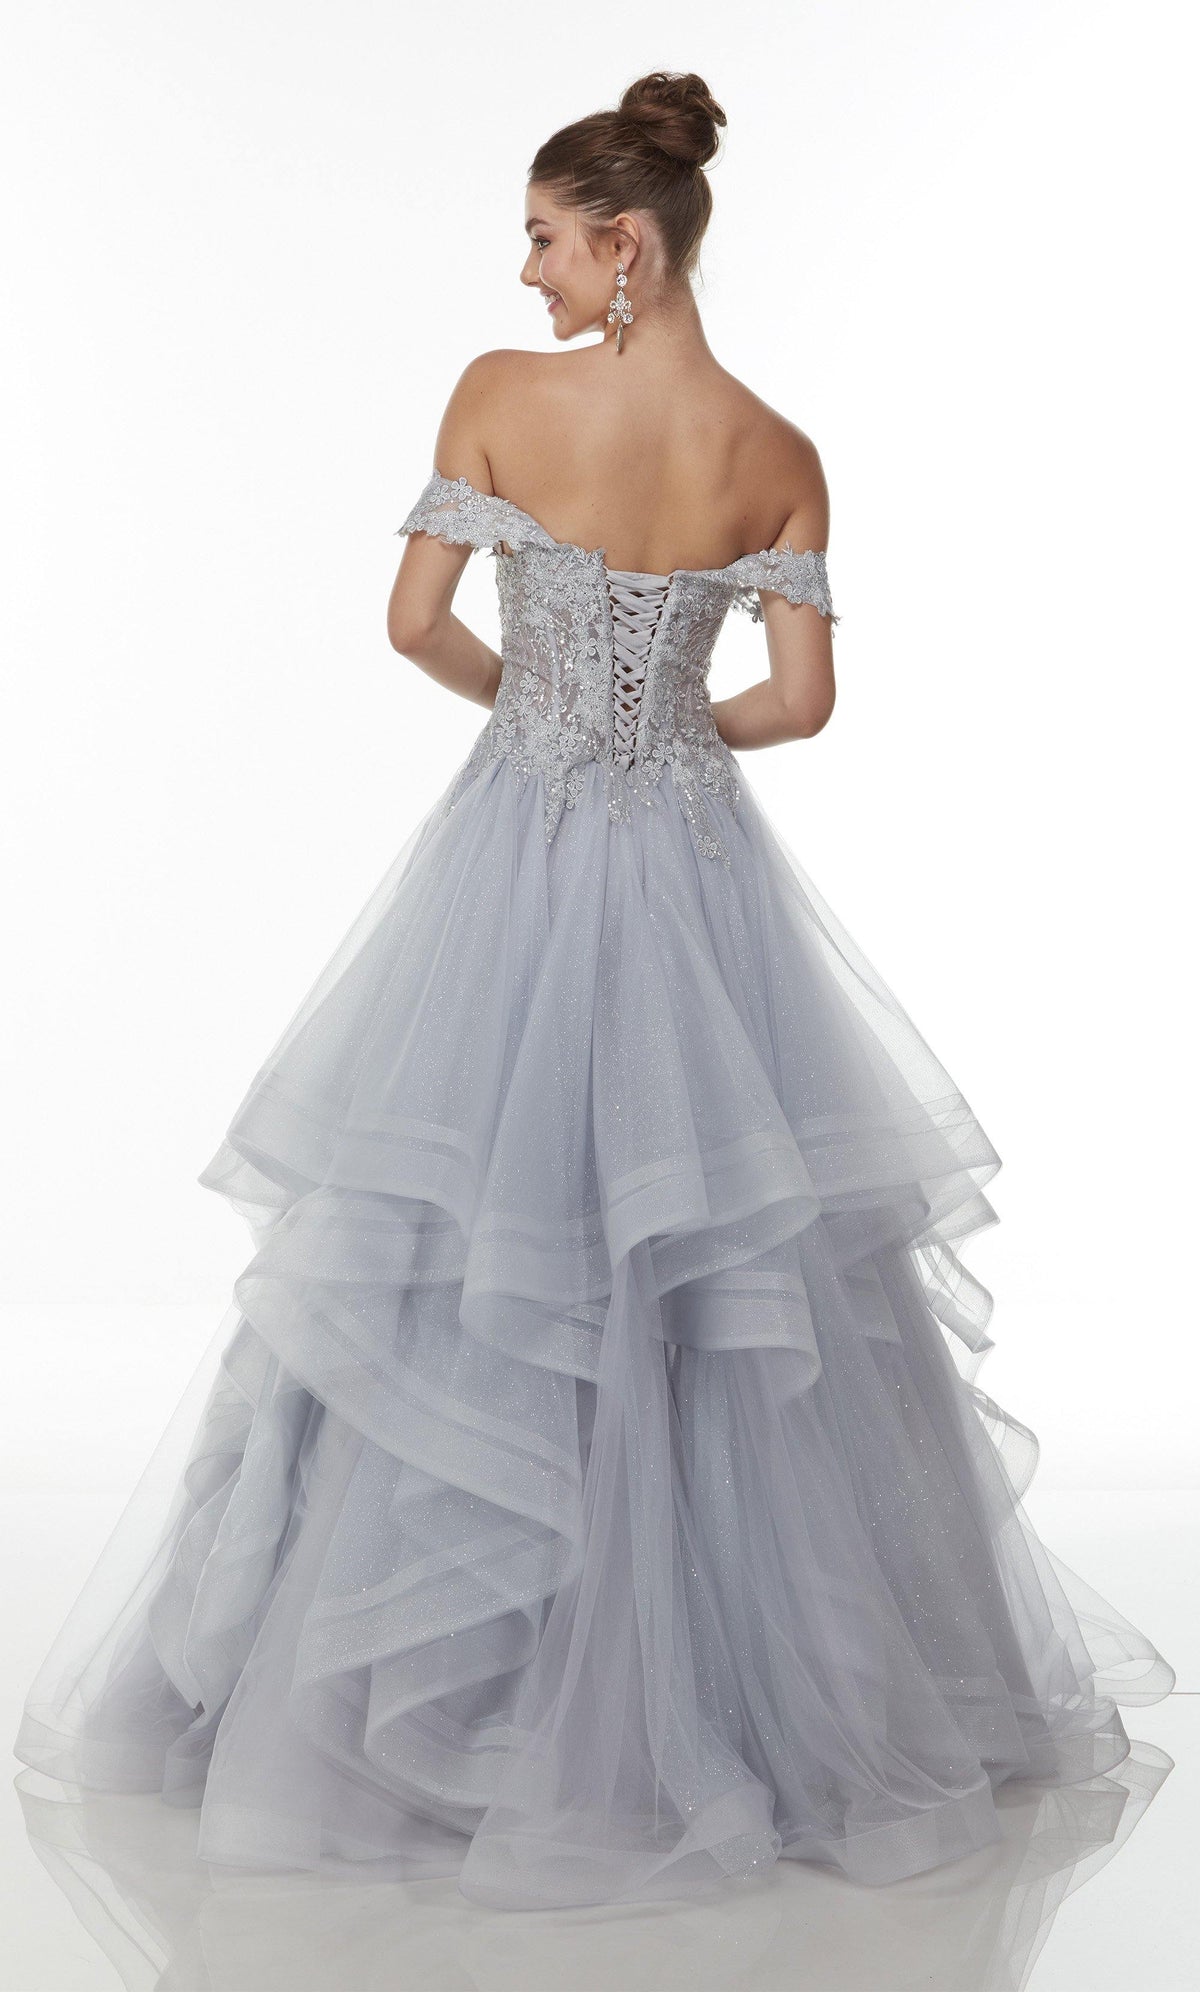 Off-the-shoulder ball gown with a lace-up, corset bodice and sparkly, layered tulle skirt in silver.